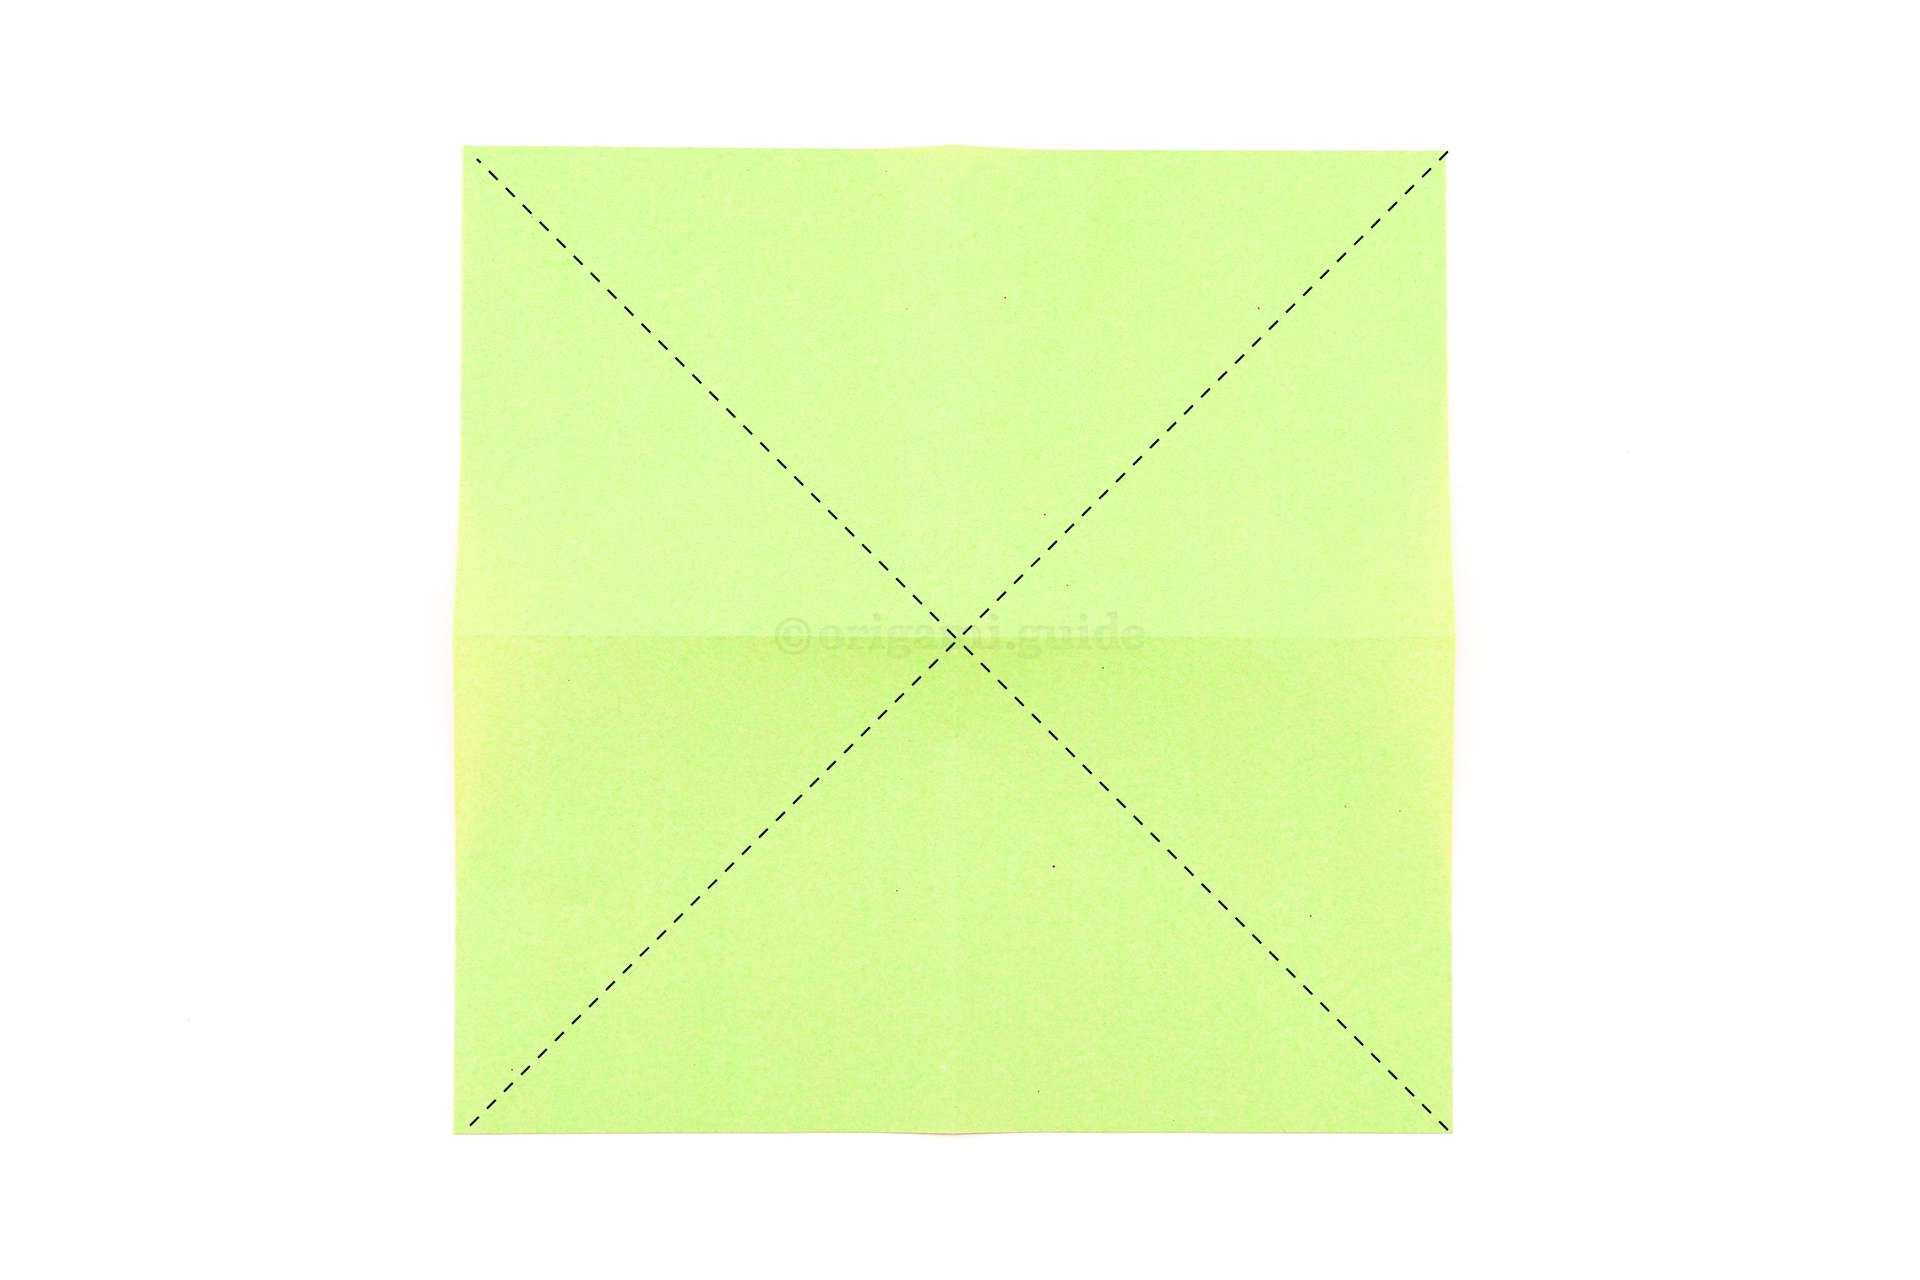 Flip the paper over to the other side. This time fold the two diagonals.